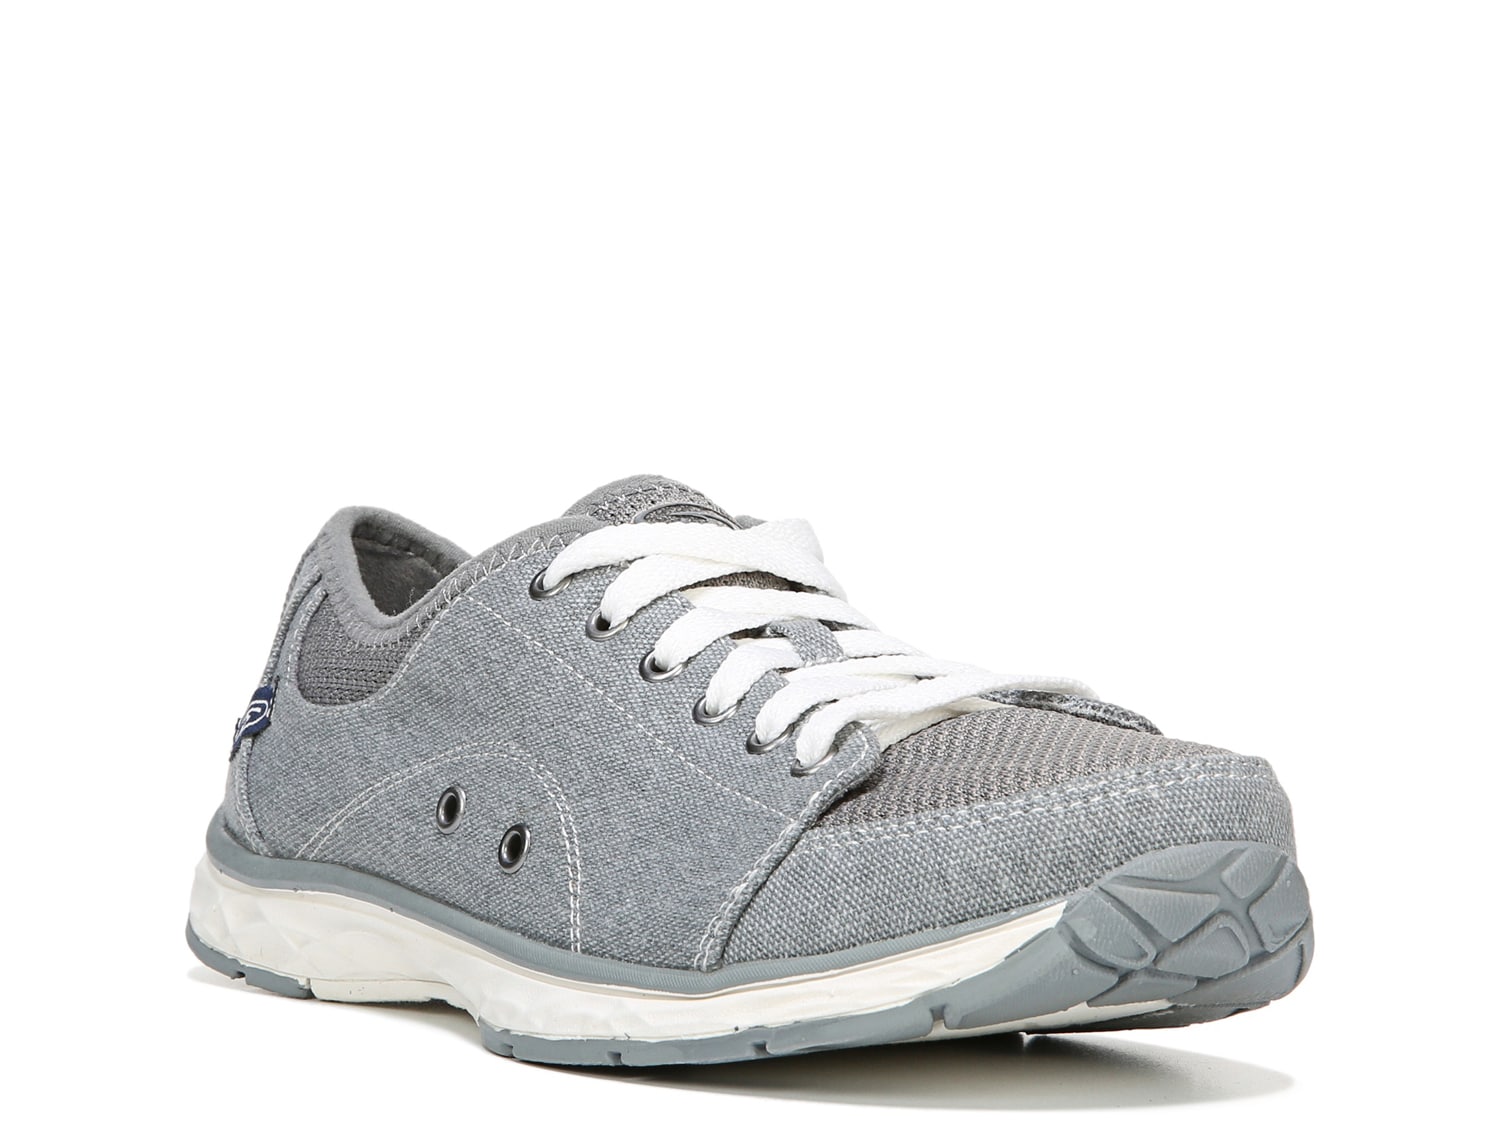 Dr. Scholl's Anna Sneaker - Free Shipping | DSW